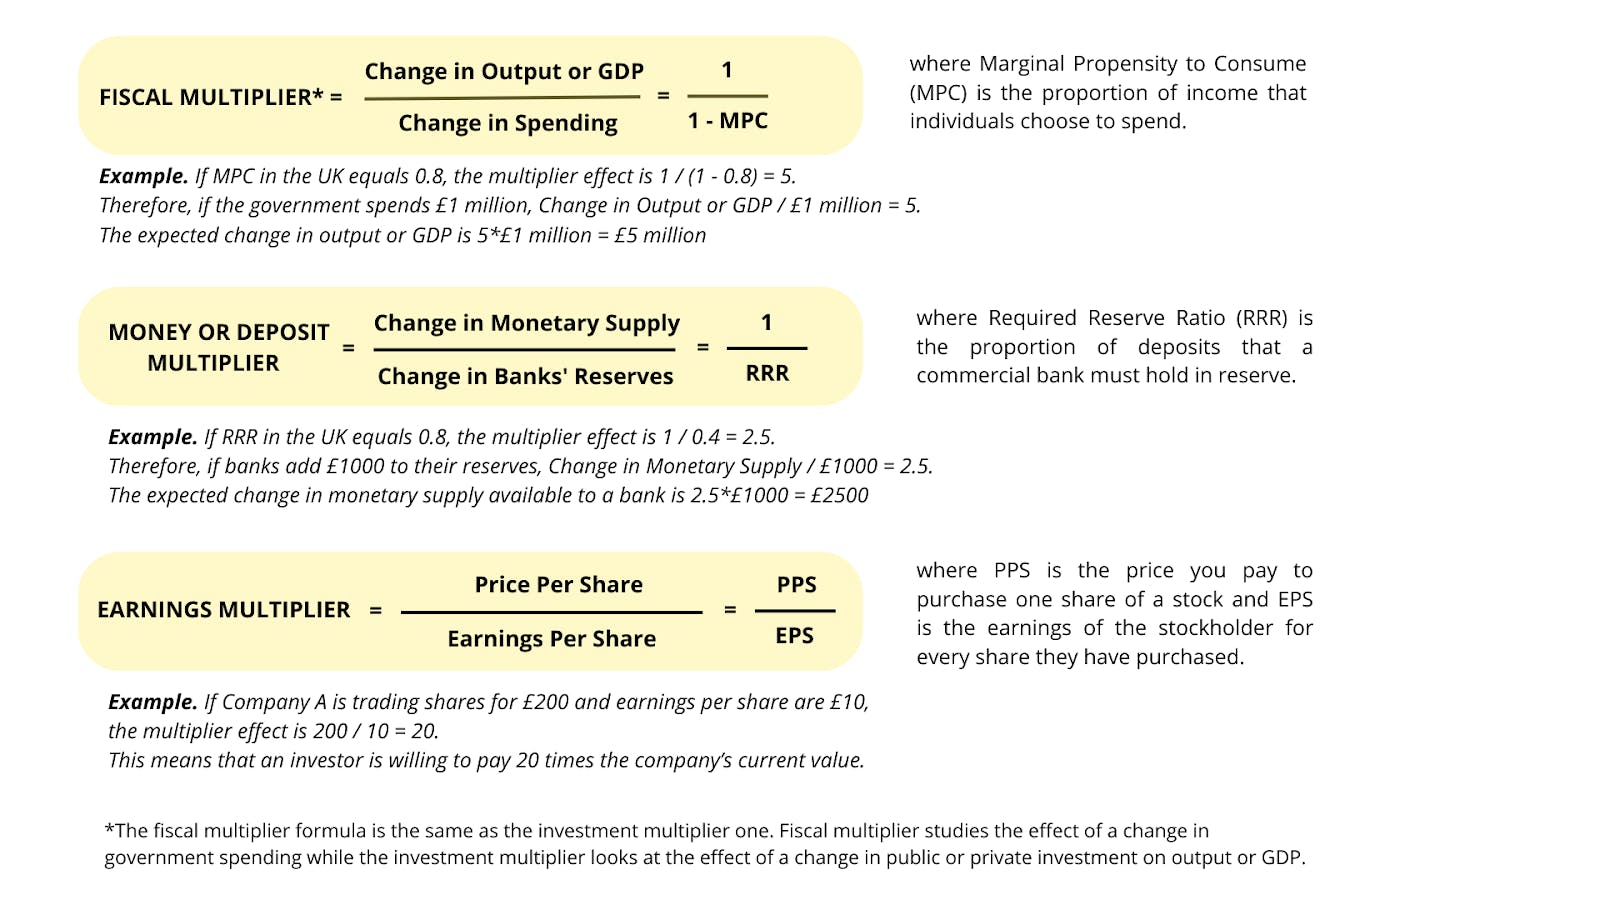 (Image) Figure 1 - Formulas and Examples for Different Types of Multipliers